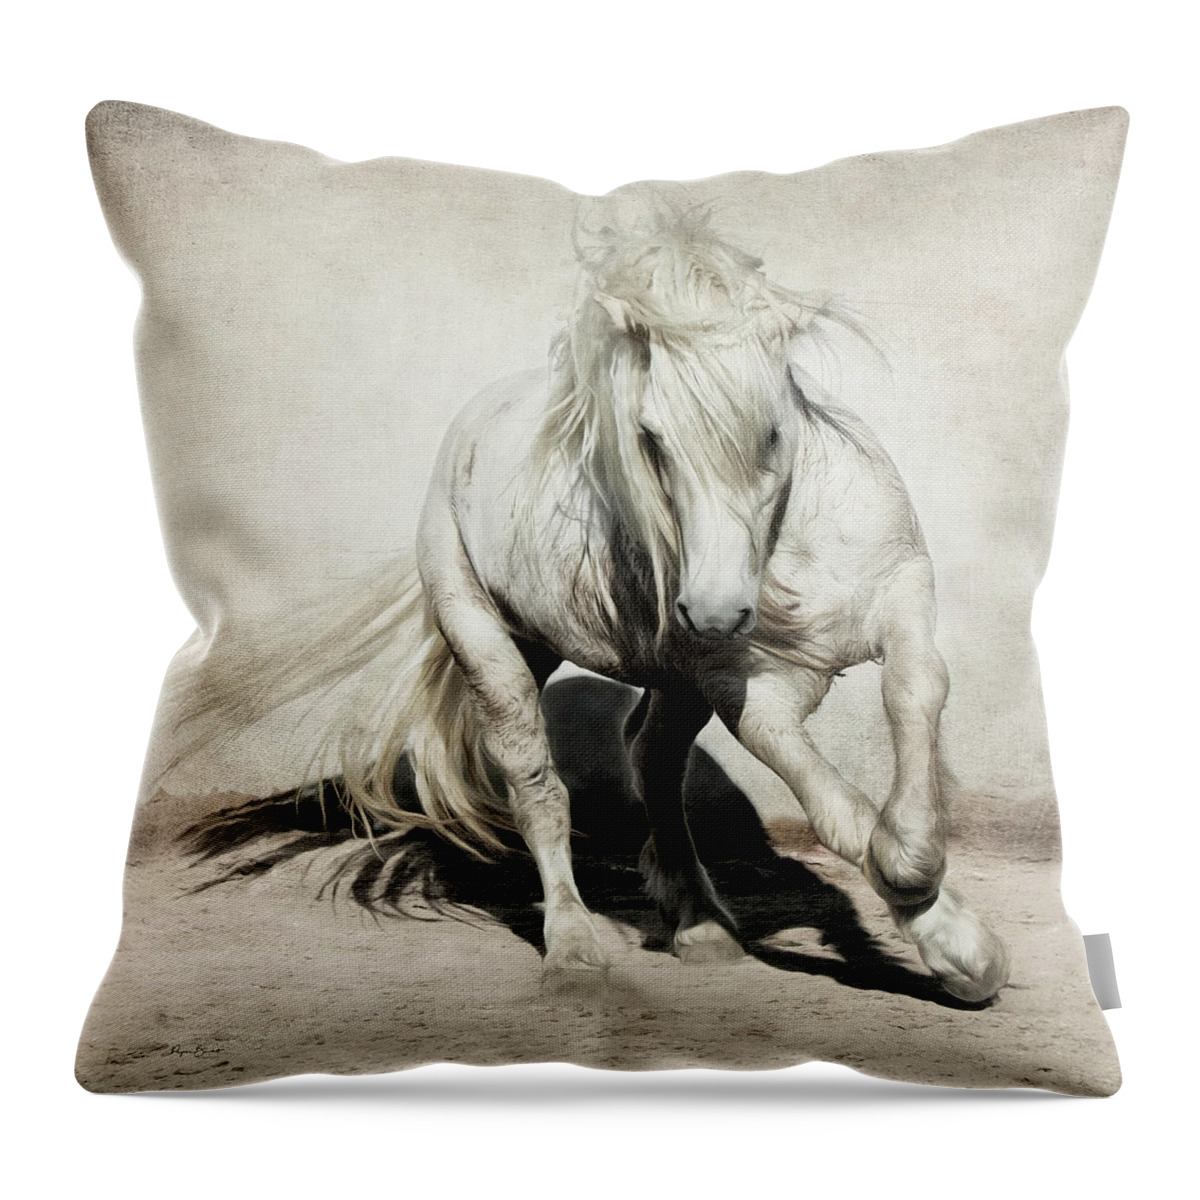 Highland Throw Pillow featuring the photograph Mighty by Phyllis Burchett